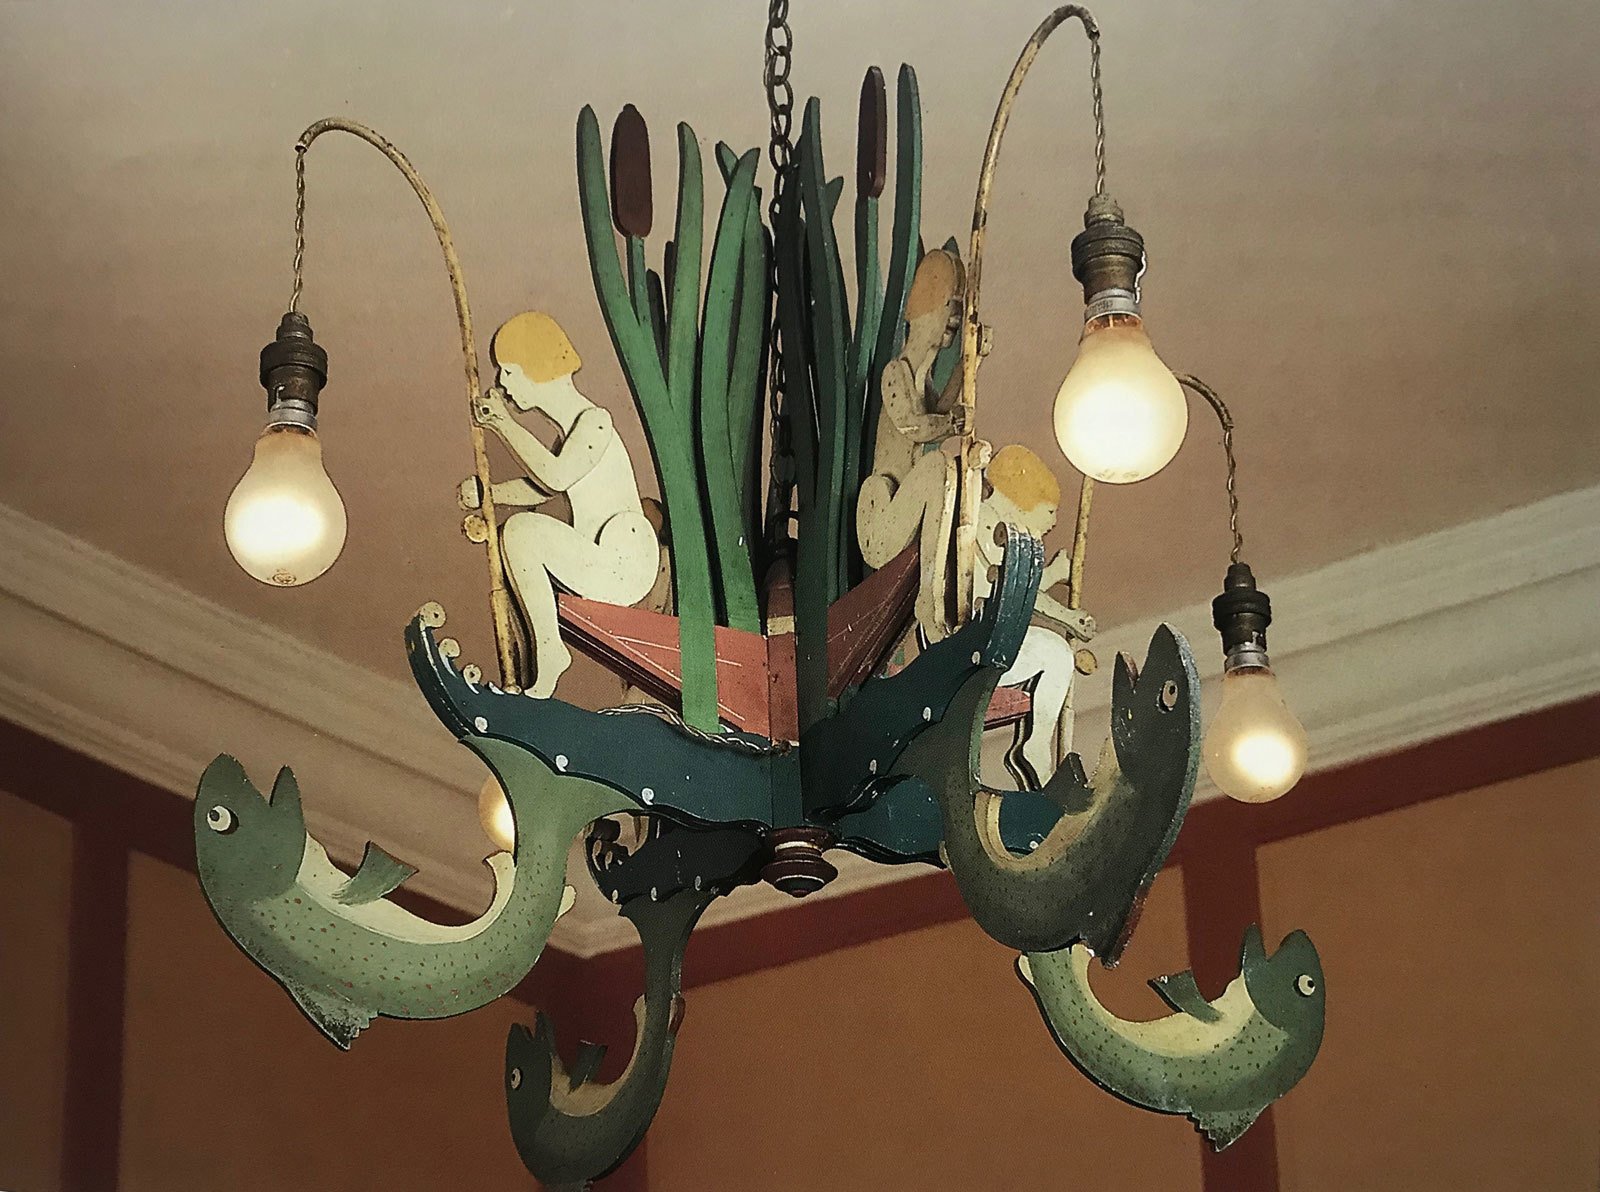 Chandelier in the nursery rooms at Rashtrapati Bhavan. New Delhi, India. Circa 1930. Reproduced from Elizabeth Wildhide. Sir Edwin Lutyens. Designing in the English Tradition. &mdash; London, Pavilion, 2000. P. 185